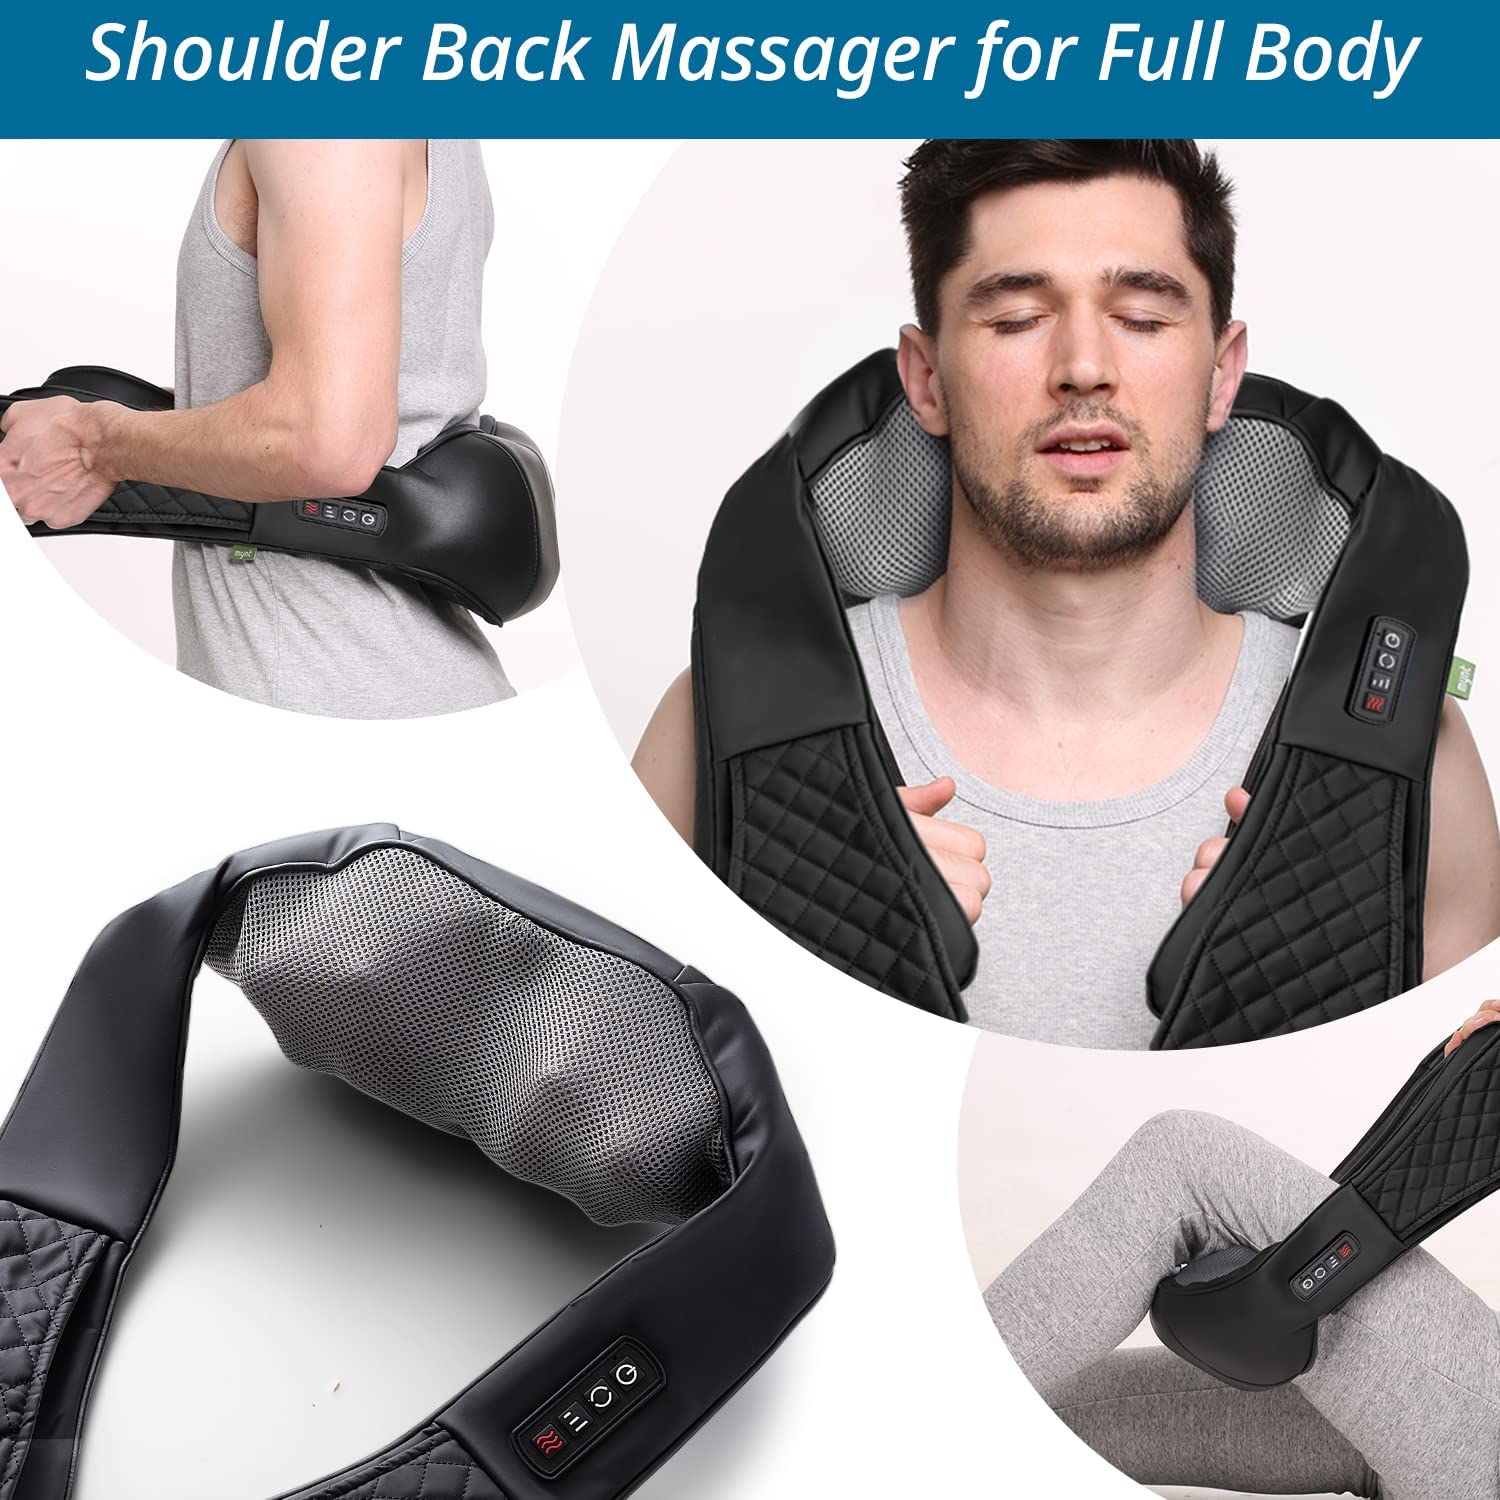  Back Massager with Adjustable Heat and Straps, Shiatsu Neck  Massagers for Neck and Back, Shoulder, Foot and Legs ( with Free Handbag ),  Gray : Health & Household